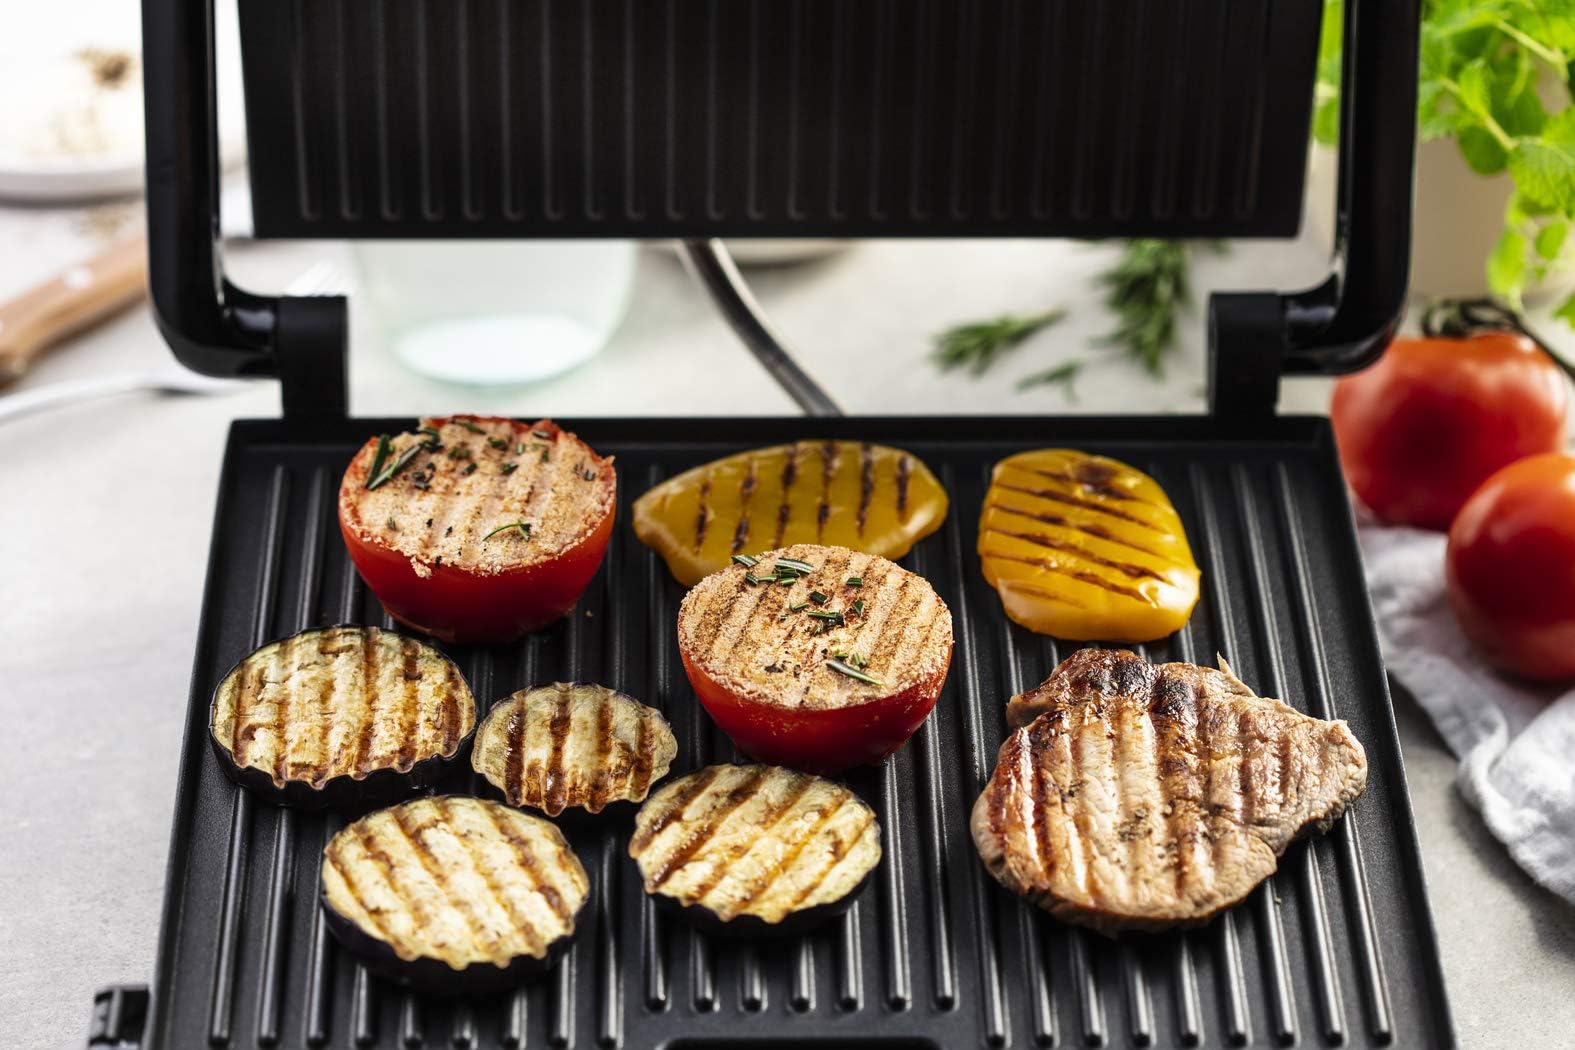 TEFAL Panini and Meat Grill, Multifunctional, 200 Watts